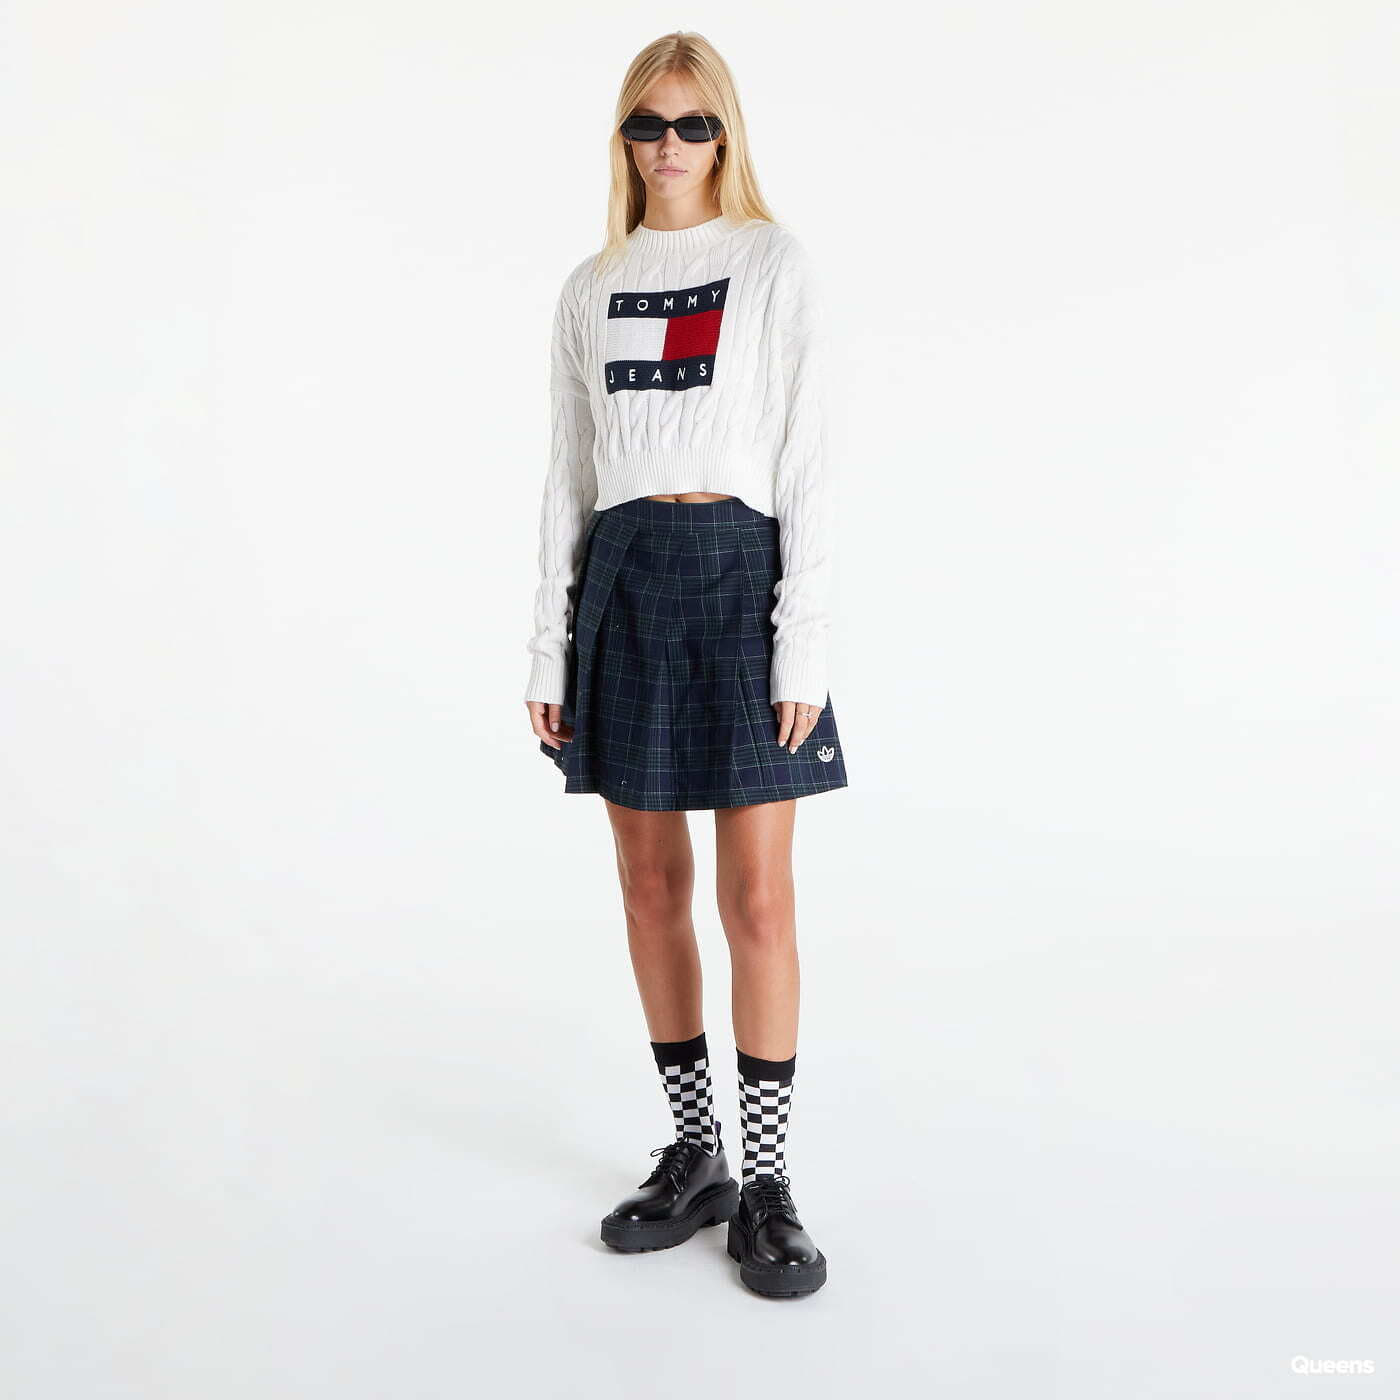 Pulovere TOMMY JEANS Boxy Center Flag Pullover White